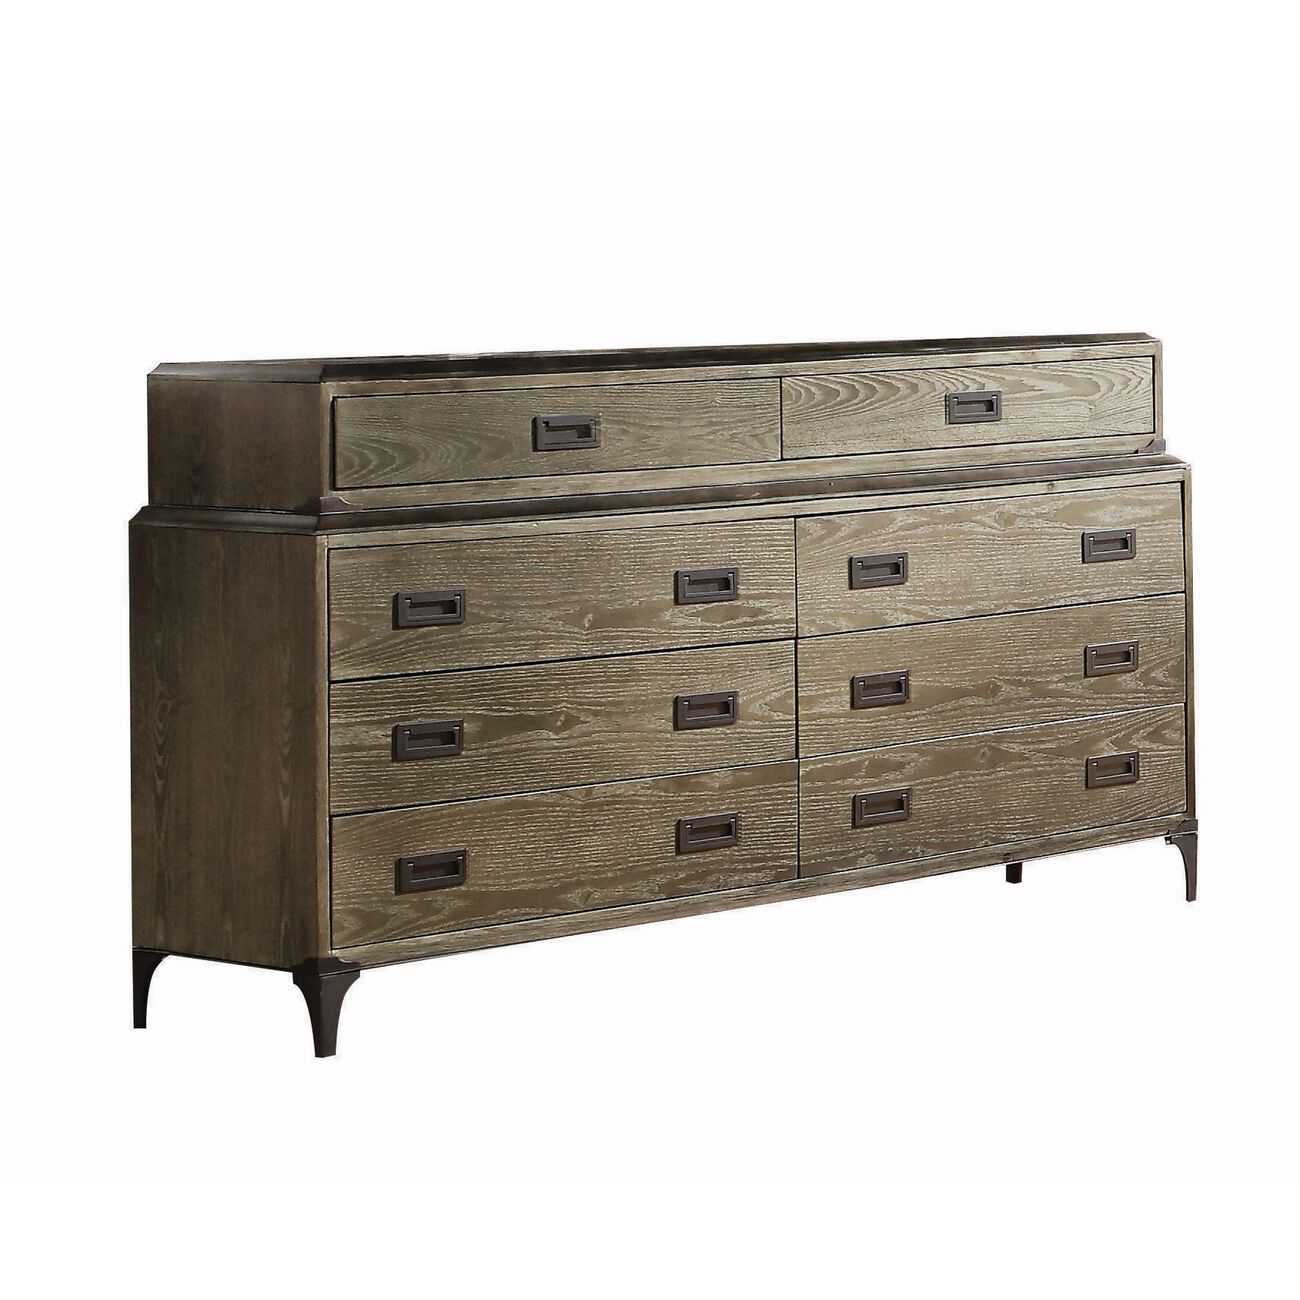 8 Drawer Wooden Dresser with Flush Mount Pulls and Metal Legs, Brown